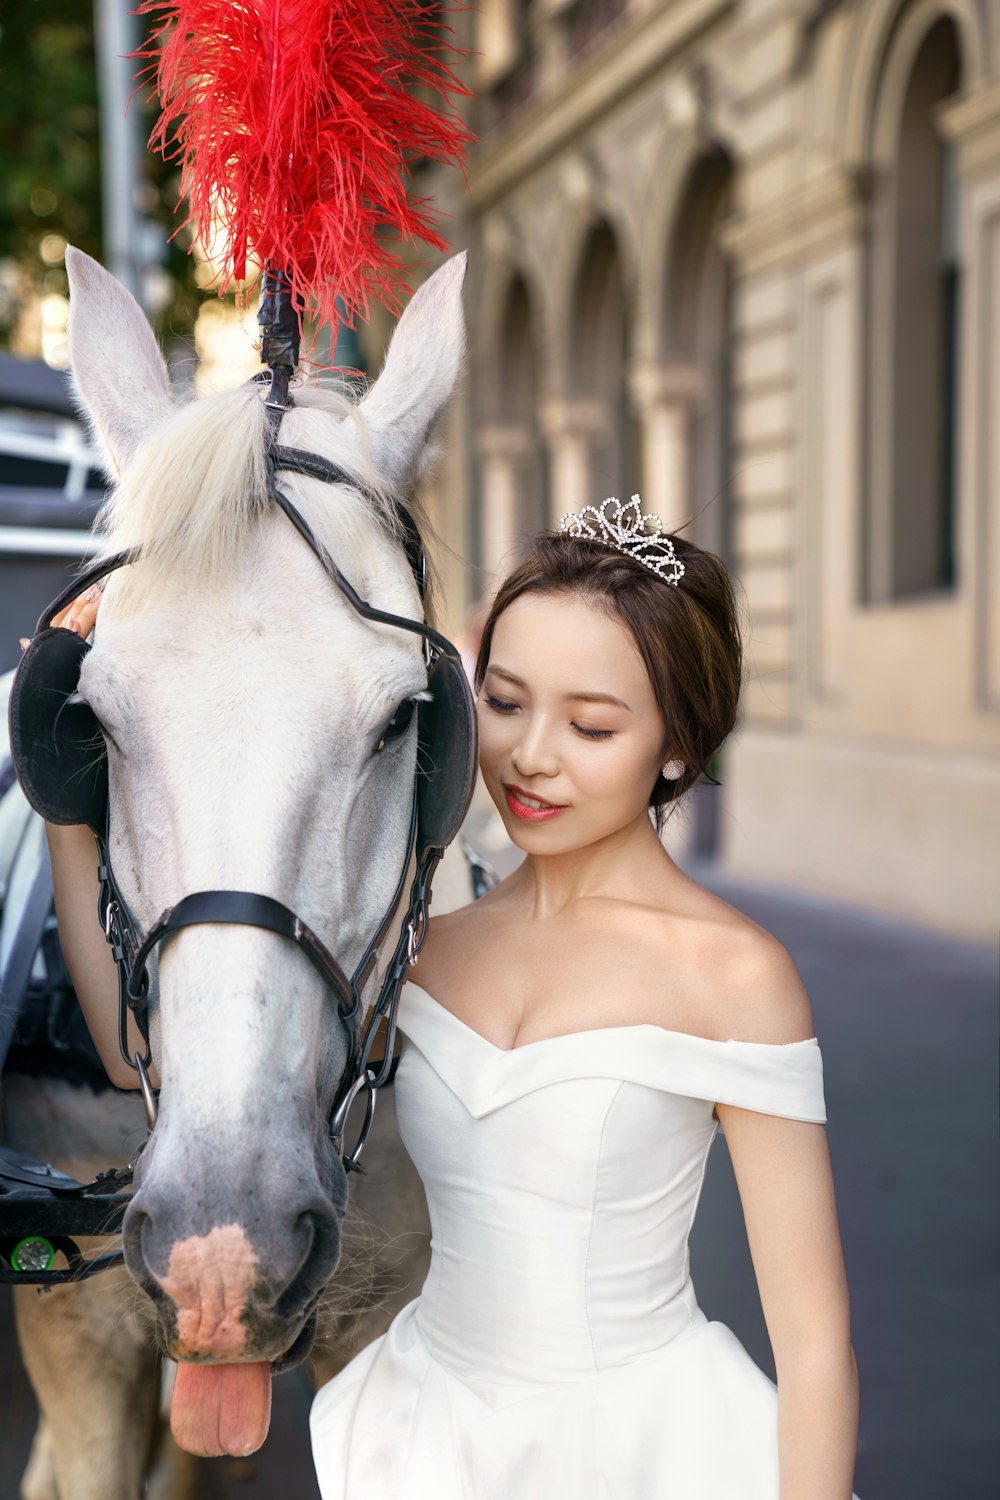 a woman in a white dress standing next to a horse